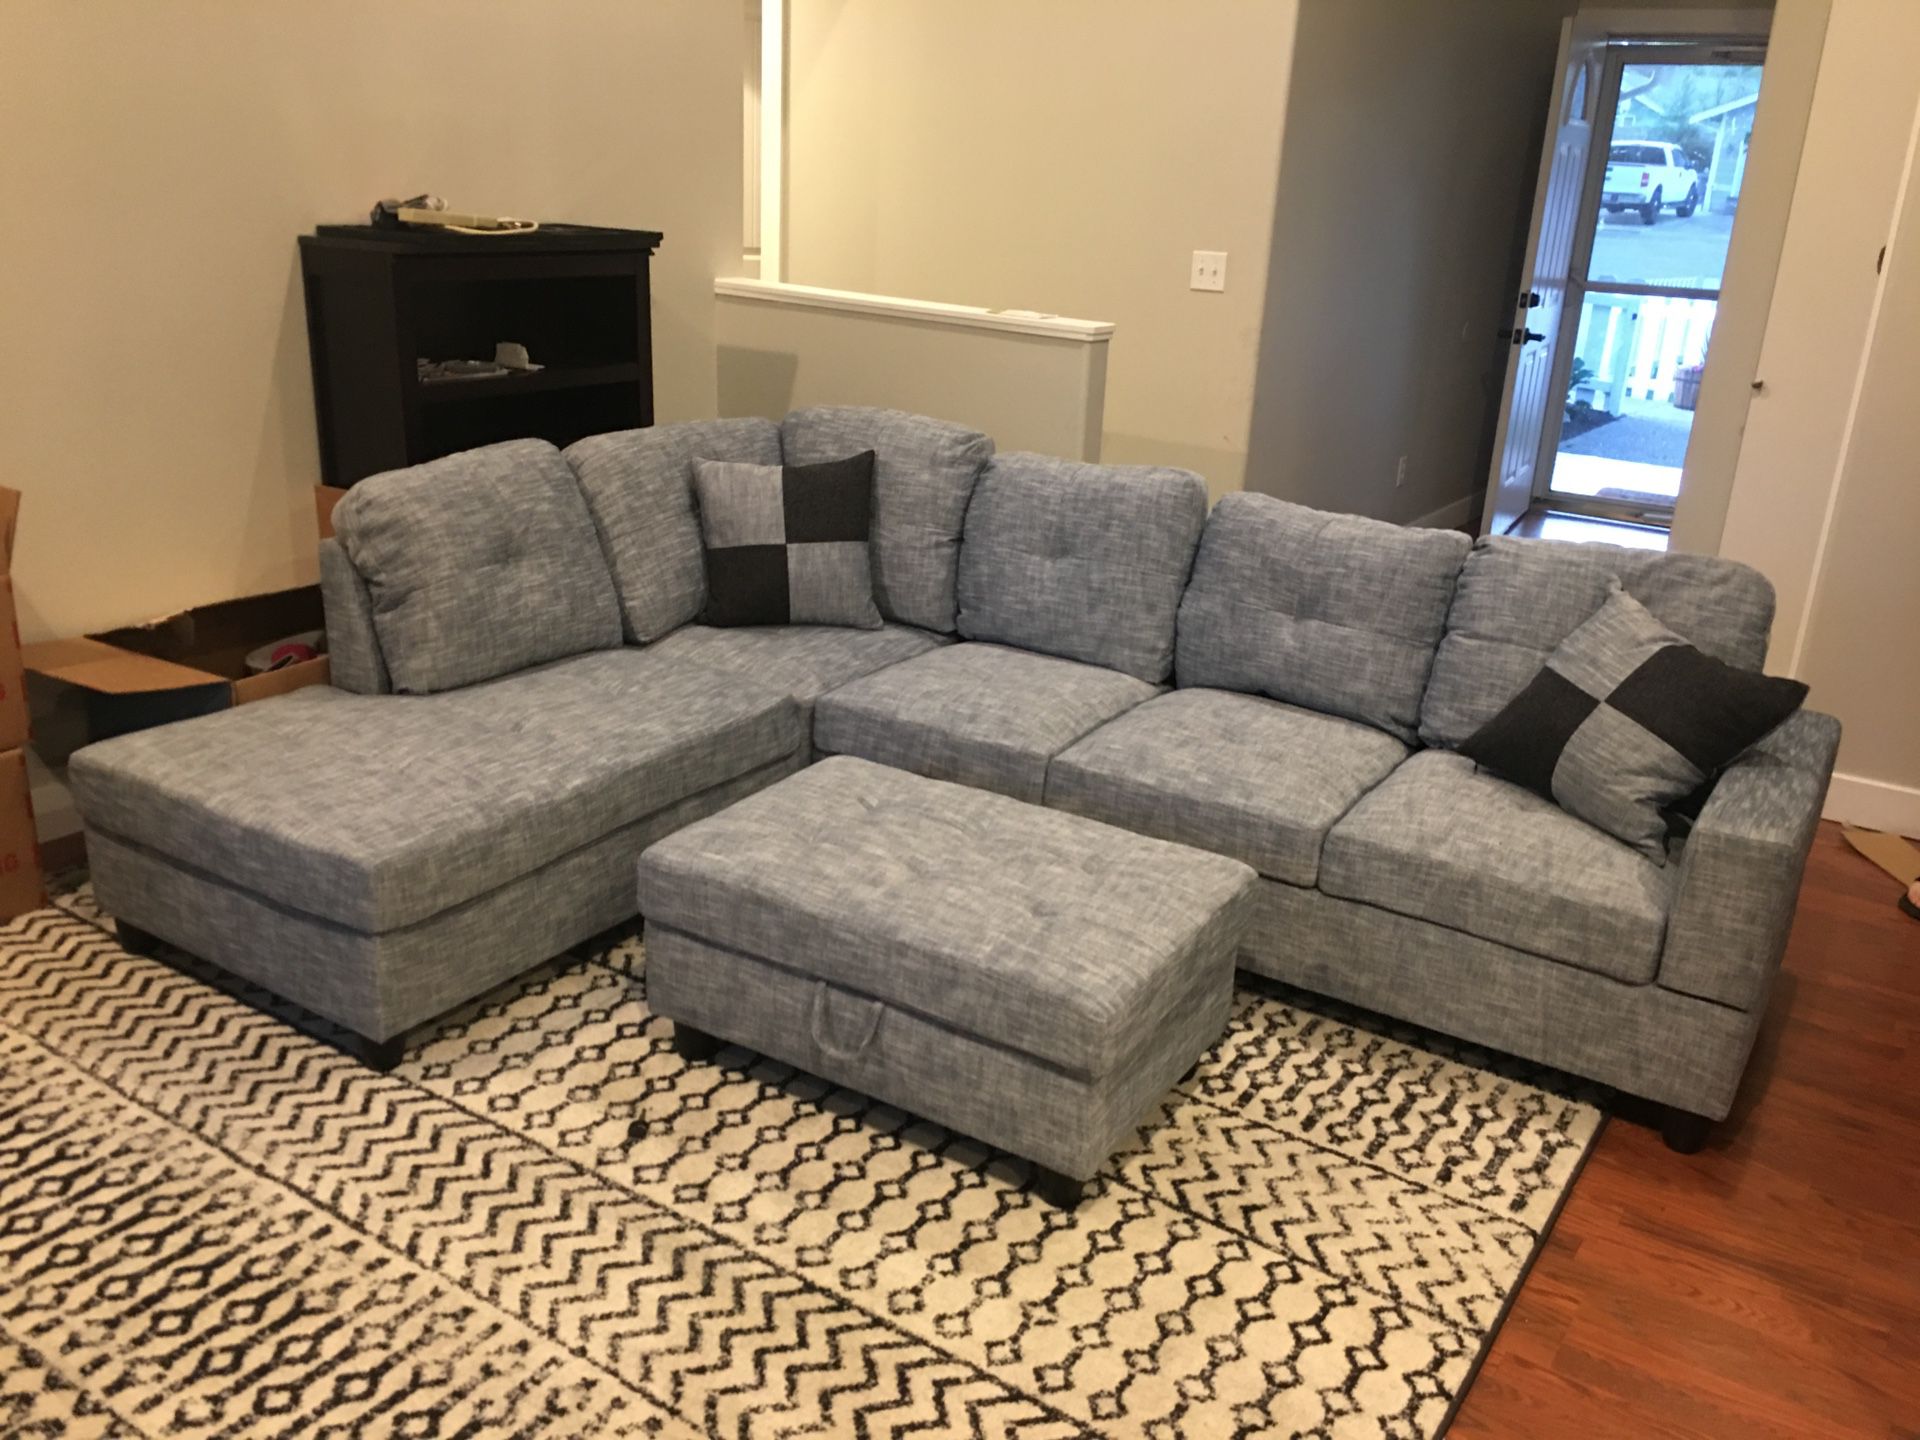 New gray linen sectional couch with storage ottoman